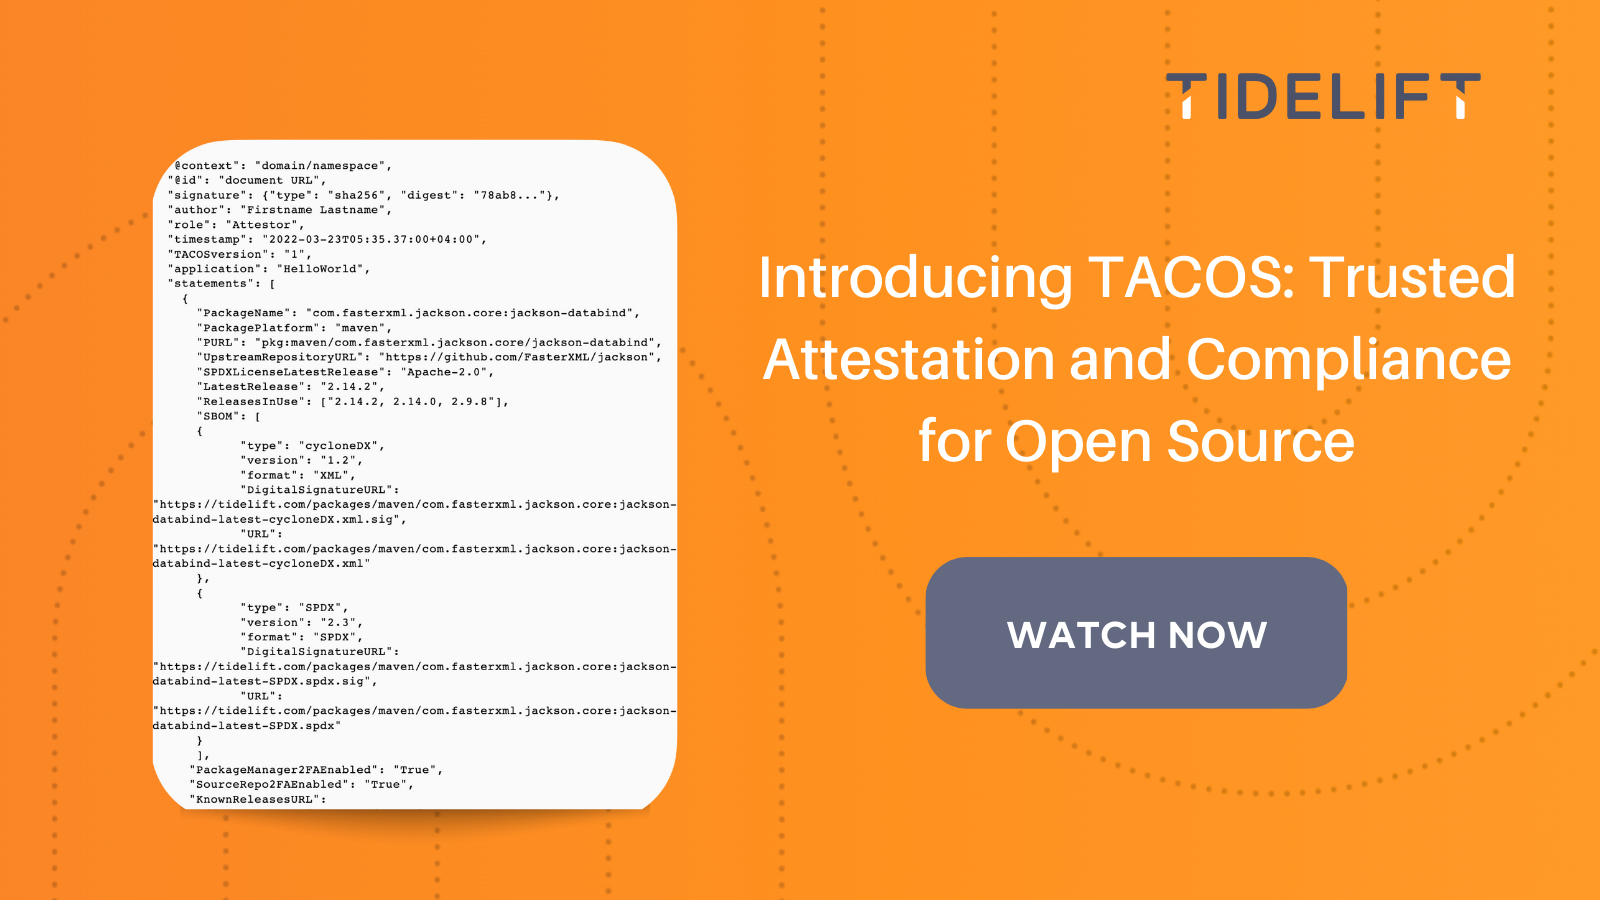 Introducing TACOS: Trusted Attestation and Compliance for Open Source